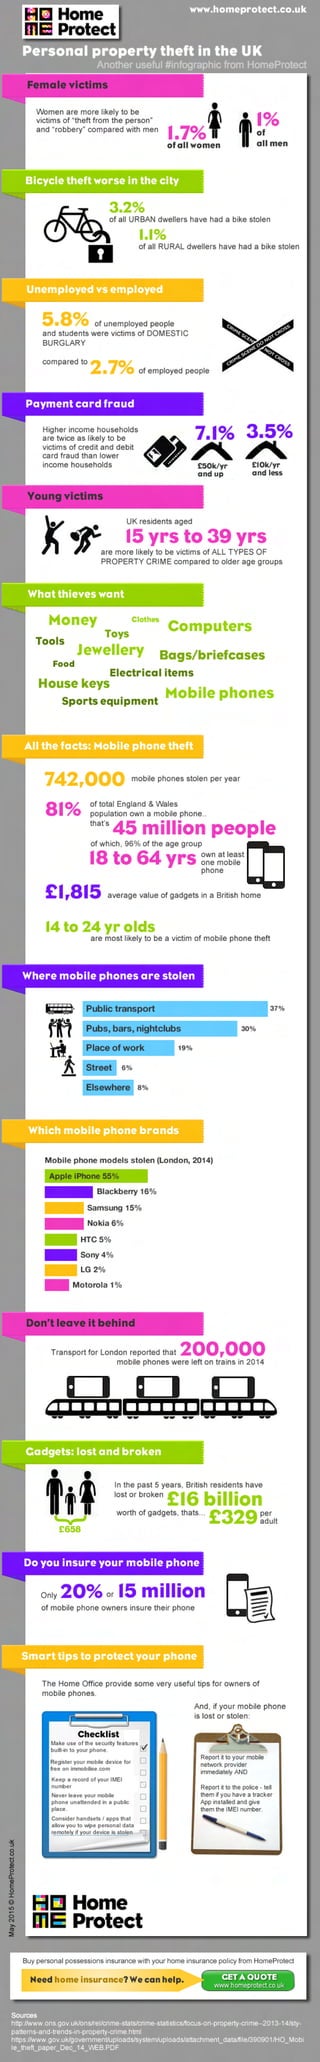 Computers
Personal property theft in the UK
Another useful #infographic from HomeProtect
Public transport 37%
Pubs, bars, nightclubs
Place of work
Street
Elsewhere
30%
19%
6%
8%
Mobile phone models stolen (London, 2014)
Apple iPhone 55%
Samsung 15%
Blackberry 16%
Nokia 6%
HTC 5%
Sony 4%
LG 2%
Motorola 1%
May2015©HomeProtect.co.uk
Sources
http://www.ons.gov.uk/ons/rel/crime-stats/crime-statistics/focus-on-property-crime--2013-14/sty-
patterns-and-trends-in-property-crime.html 
https://www.gov.uk/government/uploads/system/uploads/attachment_data/file/390901/HO_Mobi
le_theft_paper_Dec_14_WEB.PDF 
Buy personal possessions insurance with your home insurance policy from HomeProtect
GETA QUOTE
www.homeprotect.co.uk
Need home insurance? We can help.
Female victims
Bicycle theft worse in the city
What thieves want
Gadgets: lost and broken
Unemployed vs employed
Women are more likely to be
victims of “theft from the person”
and “robbery” compared with men

of all women
of 
all men
3 . 2 % 
of all URBAN dwellers have had a bike stolen
1. 1% 
of all RURAL dwellers have had a bike stolen
of unemployed people 
and students were victims of DOMESTIC
BURGLARY

compared to
5.8%
81%
200,000
£16 billion
£329
20% 15 million
£658
45 million people
742,000
£1,815
15 yrs to 39 yrs
18 to 64 yrs
2.7%
7.1% 3.5%
of employed people
Young victims
Don’t leave it behind
Payment card fraud
Higher income households
are twice as likely to be
victims of credit and debit
card fraud than lower
income households
Where mobile phones are stolen
Do you insure your mobile phone
are more likely to be victims of ALL TYPES OF
PROPERTY CRIME compared to older age groups
mobile phones stolen per year
average value of gadgets in a British home
are most likely to be a victim of mobile phone theft
Transport for London reported that 
mobile phones were left on trains in 2014
In the past 5 years, British residents have 
lost or broken
Only or
worth of gadgets, thats...
of mobile phone owners insure their phone
The Home Office provide some very useful tips for owners of
mobile phones.
And, if your mobile phone
is lost or stolen:
per
adult
of total England & Wales
population own a mobile phone..
that’s
of which, 96% of the age group
own at least
one mobile 
phone
UK residents aged
£50k/yr 
and up
£10k/yr 
and less
Money
Food
Jewellery
ComputersToys
Mobile phones
14 to 24 yr olds
Electrical items
House keys
Bags/briefcases
Clothes
Tools
Sports equipment
All the facts: Mobile phone theft
Which mobile phone brands
Smart tips to protect your phone
Make use of the security features
built-in to your phone.
Report it to your mobile
network provider
immediately AND

Report it to the police - tell
them if you have a tracker
App installed and give
them the IMEI number.
Register your mobile device for
free on immobilise.com
Keep a record of your IMEI
number
Never leave your mobile
phone unattended in a public
place.
Consider handsets / apps that
allow you to wipe personal data
remotely if your device is stolen
{
1.7%
1%
www.homeprotect.co.uk
 